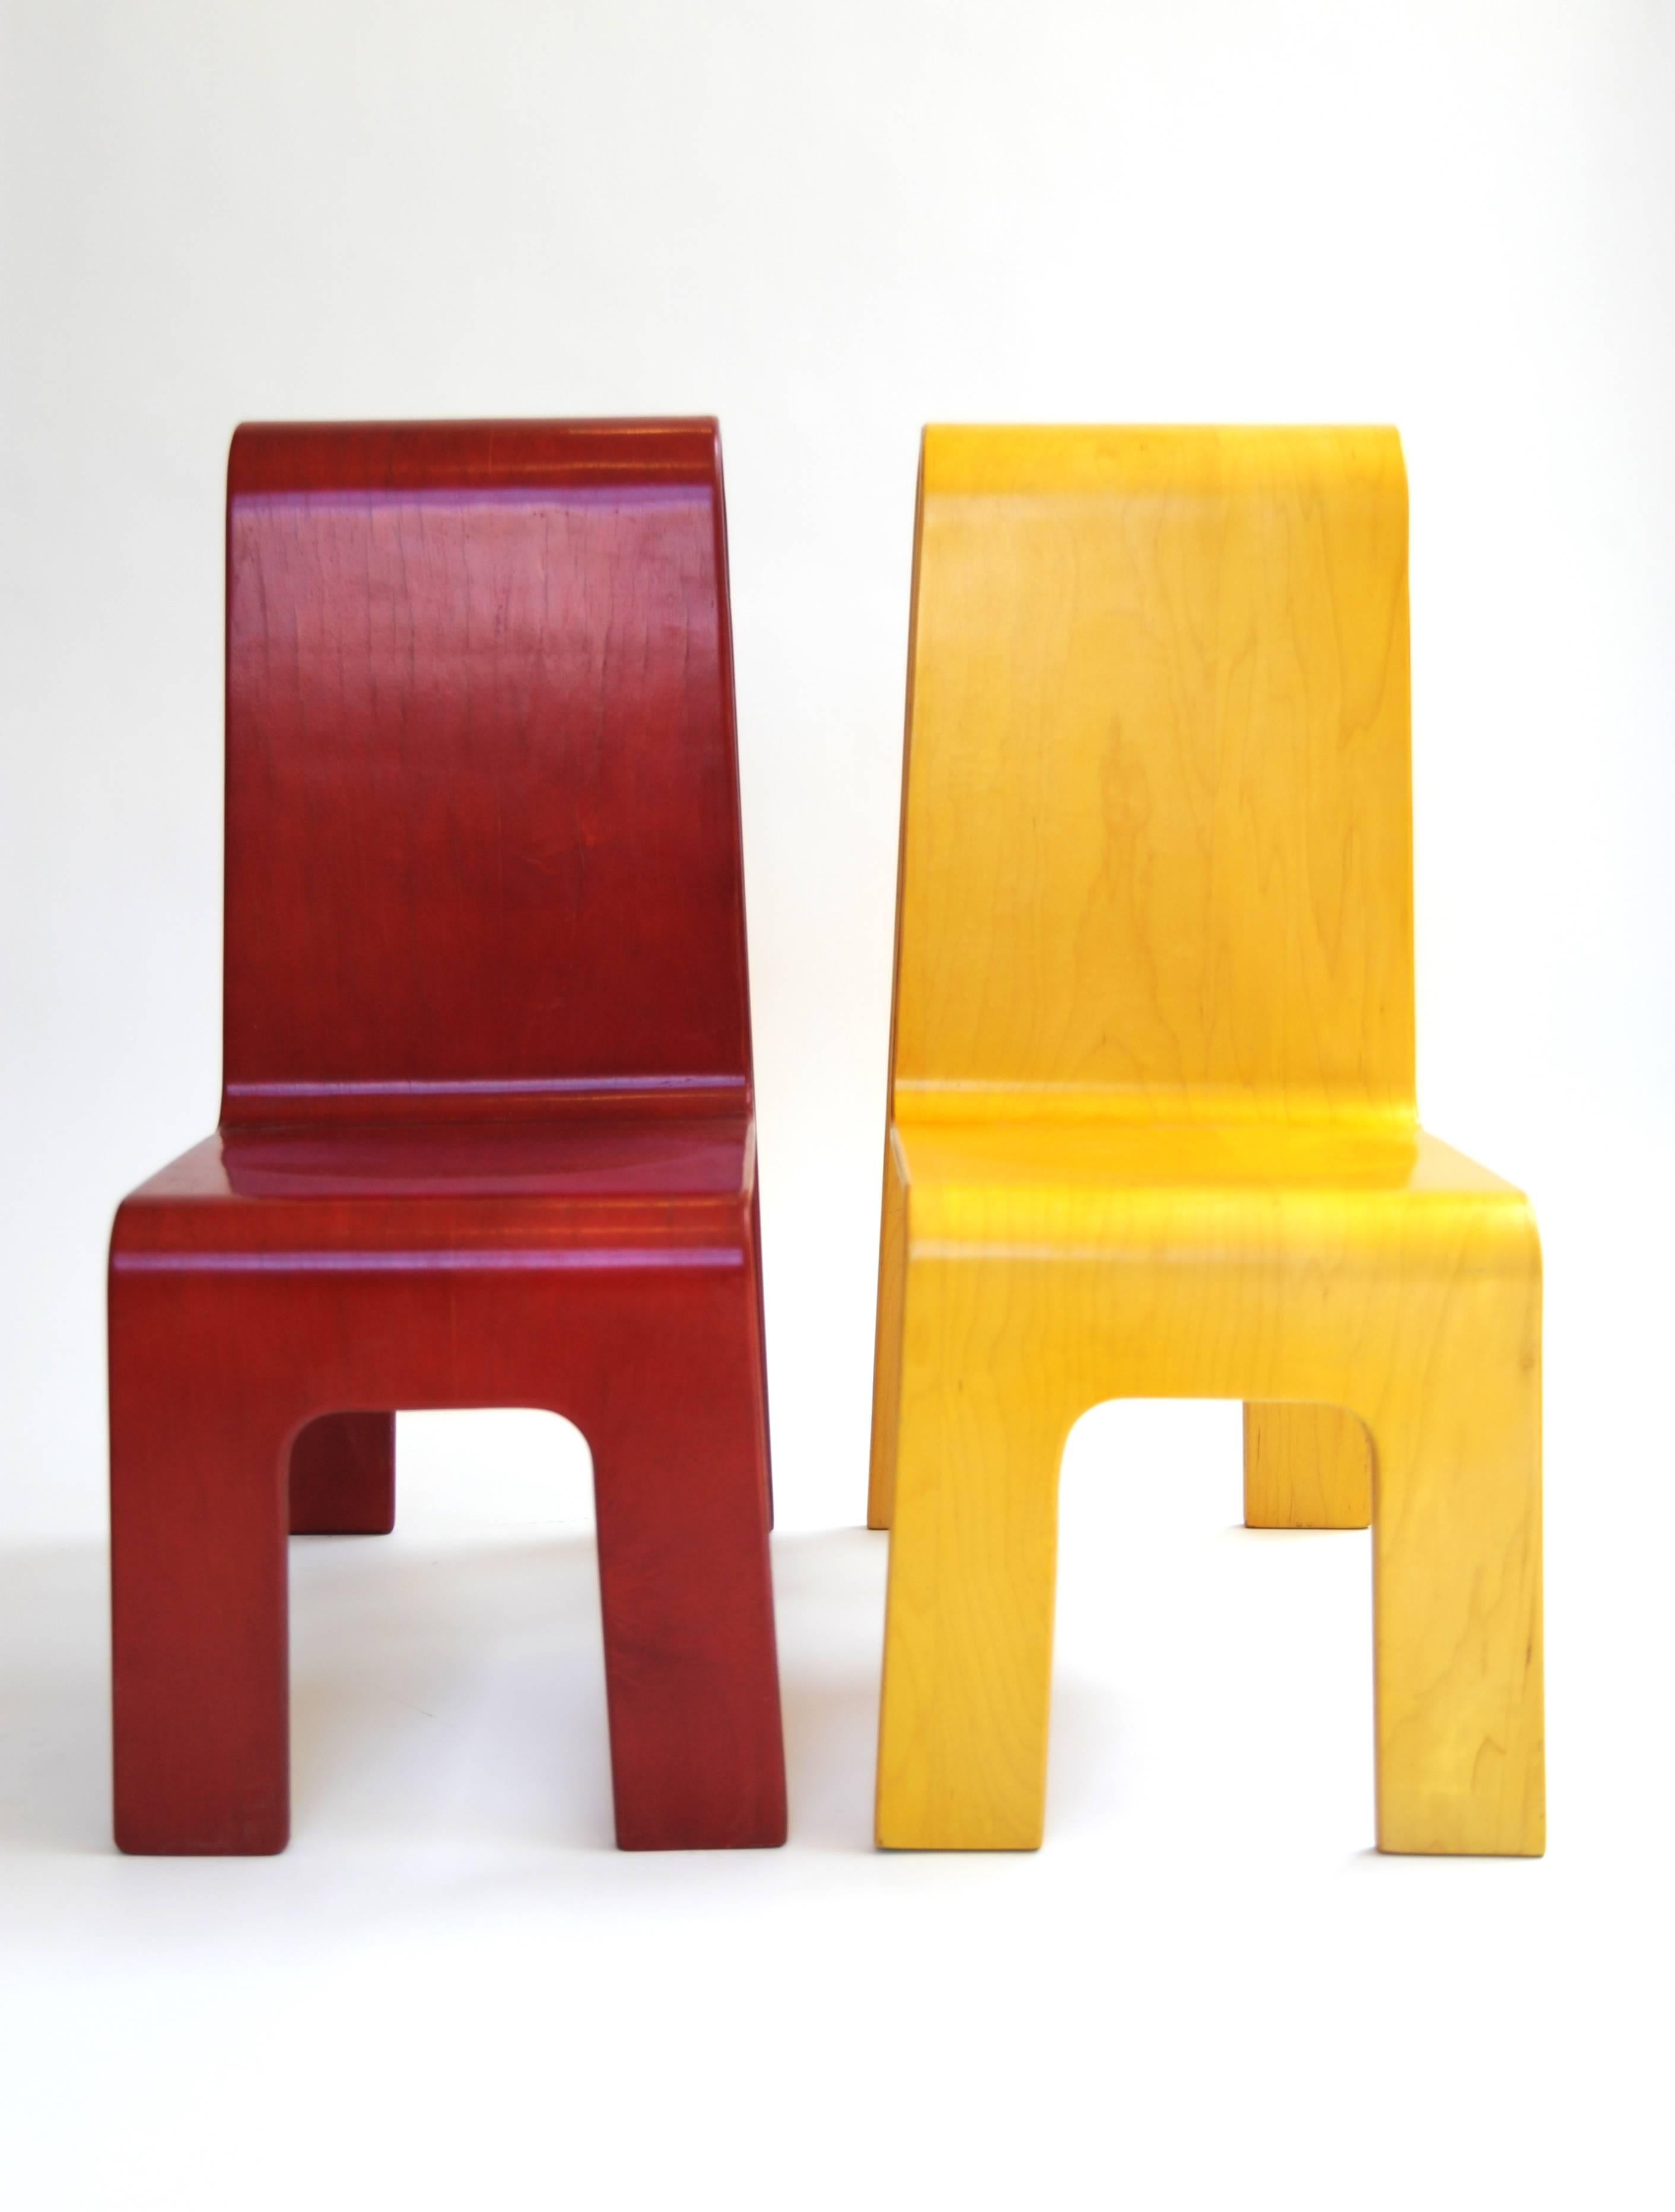 Finnish Kinder-Link Molded Maple Plywood Cut-Out Child Chair by Isku, Finland, in Yellow For Sale